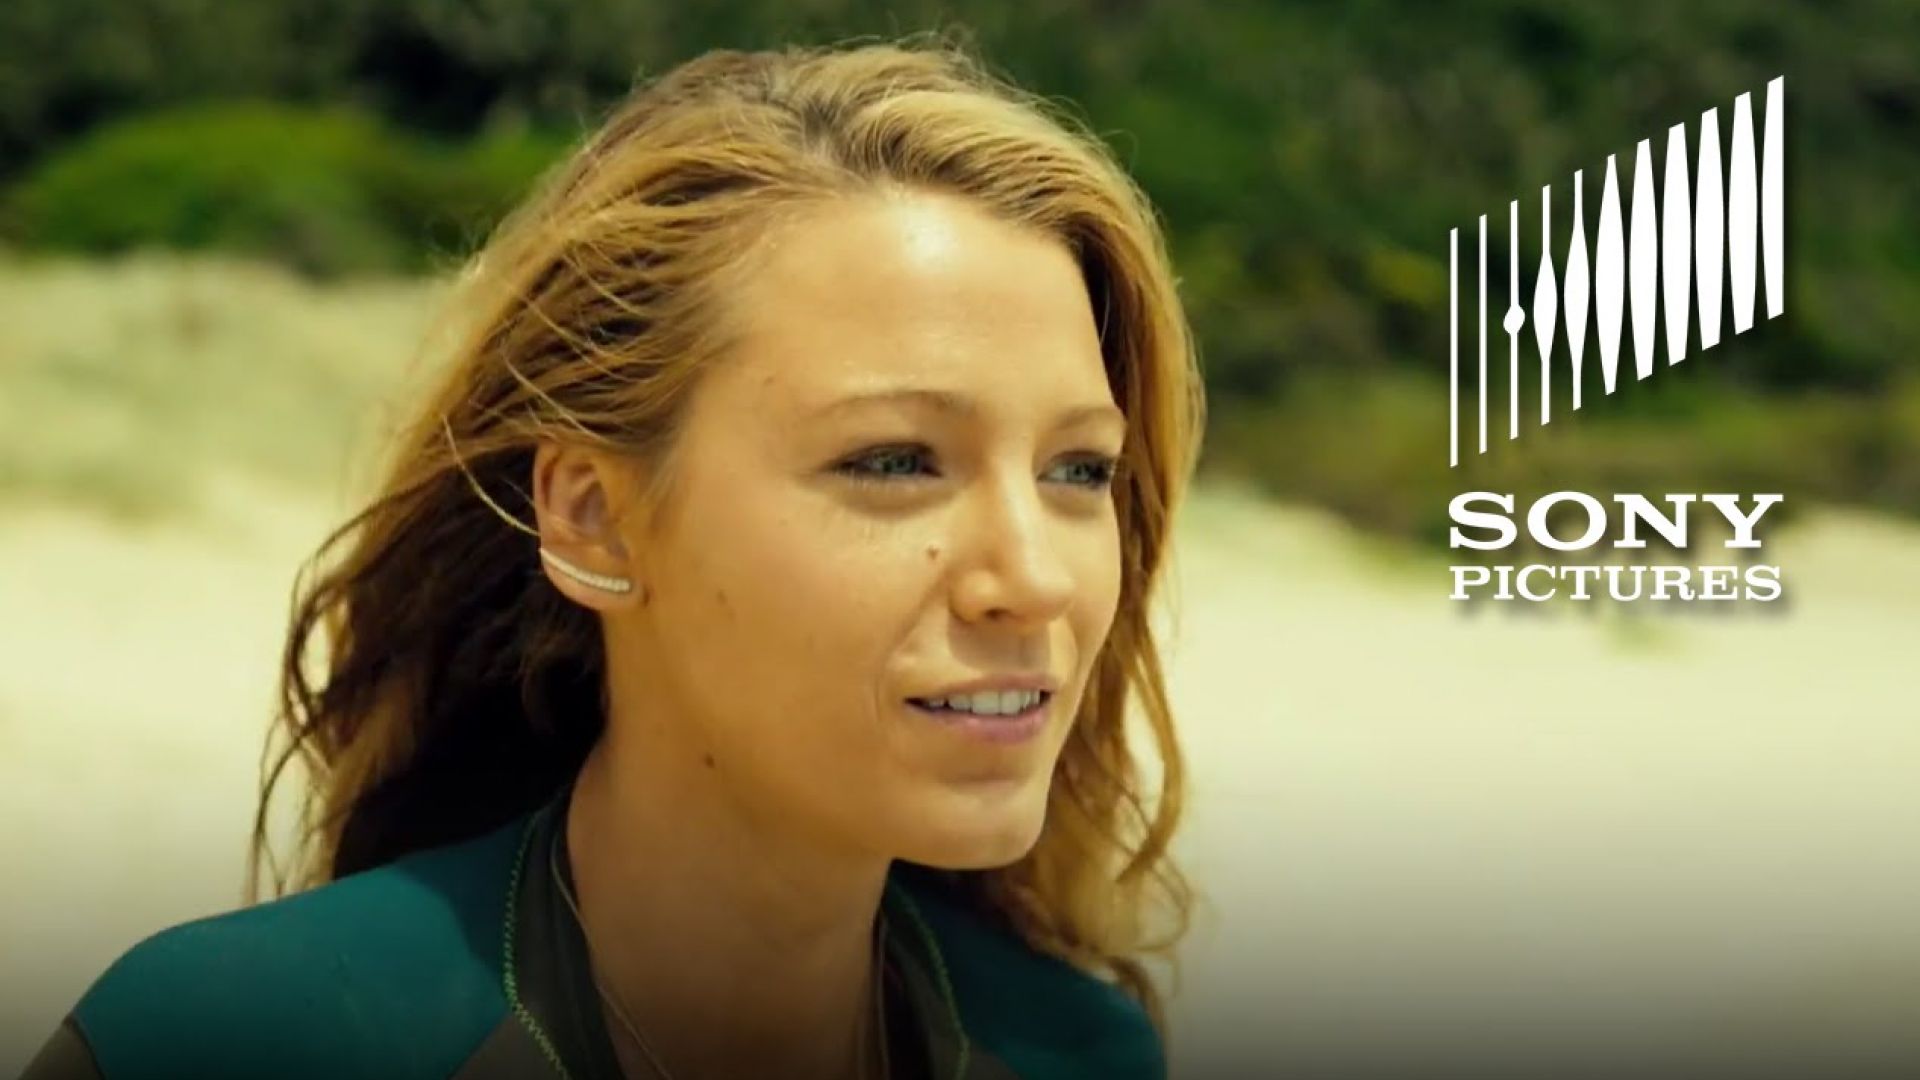 The Shallows - The Beginning trailer (starring Blake Lively)